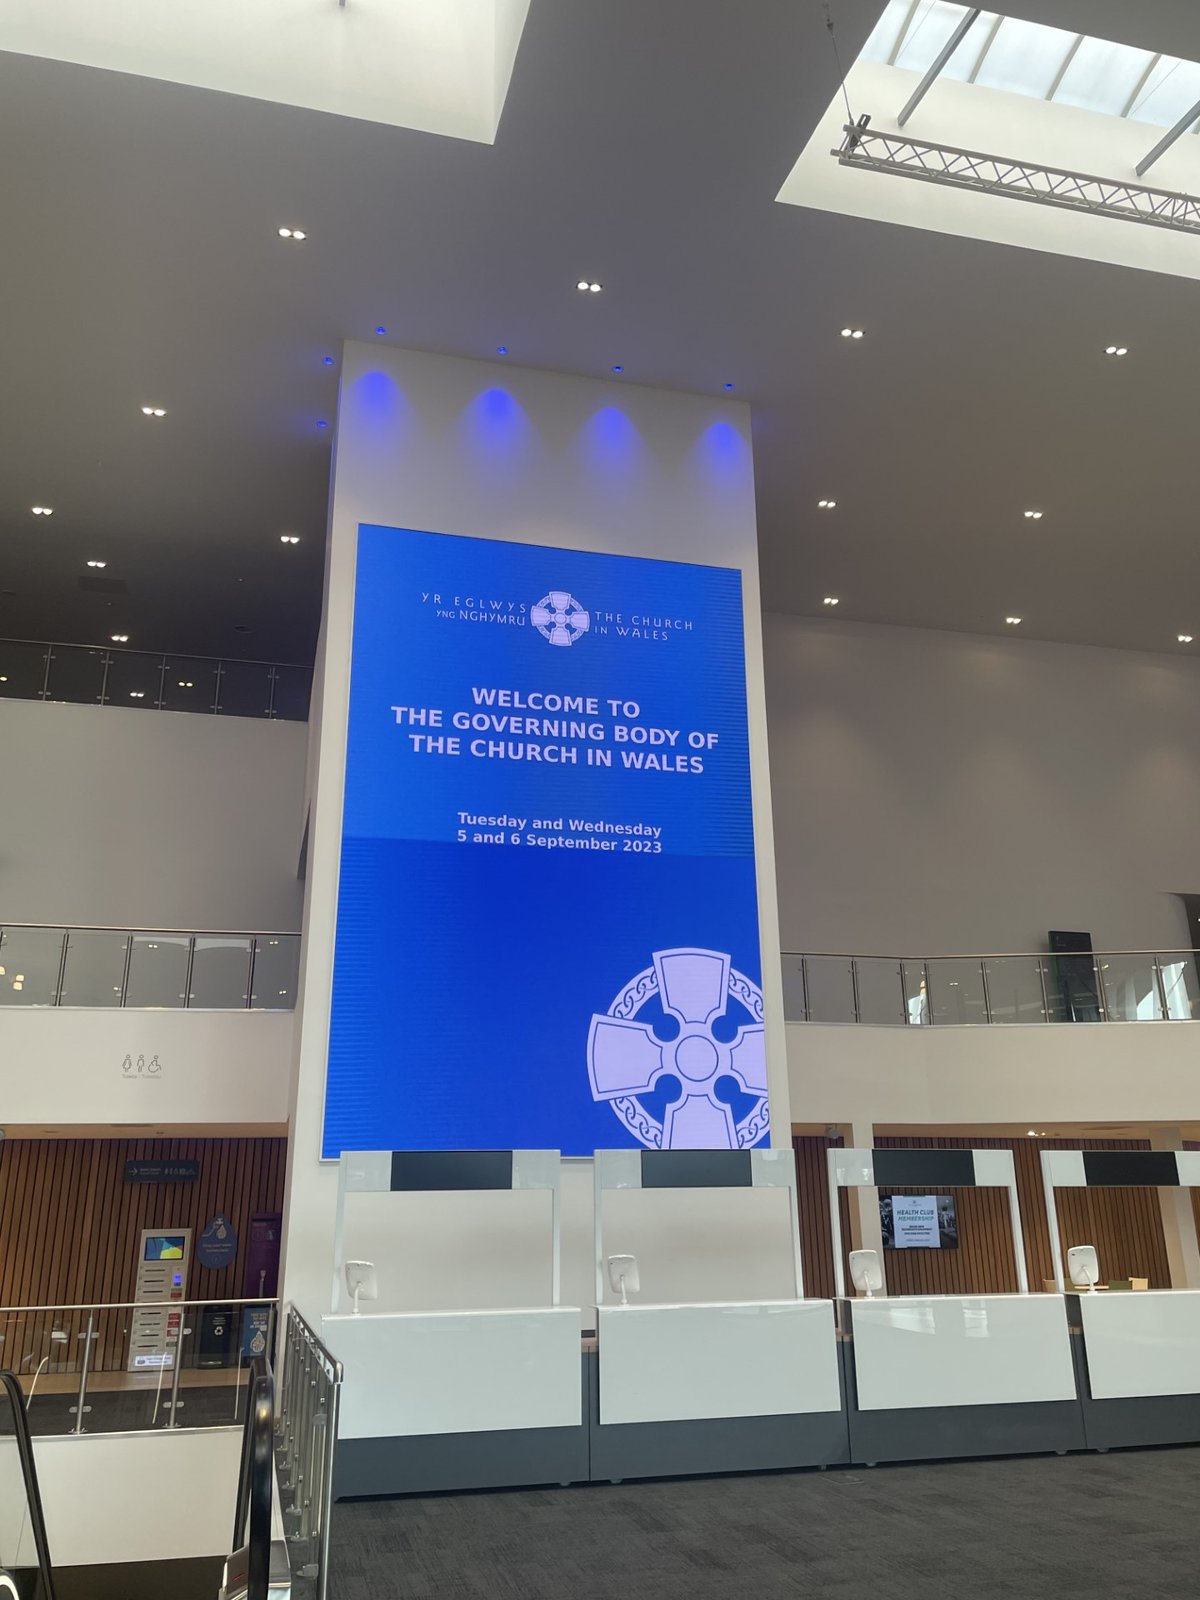 A large projection onto a wall welcomes delegates to the Governing Body